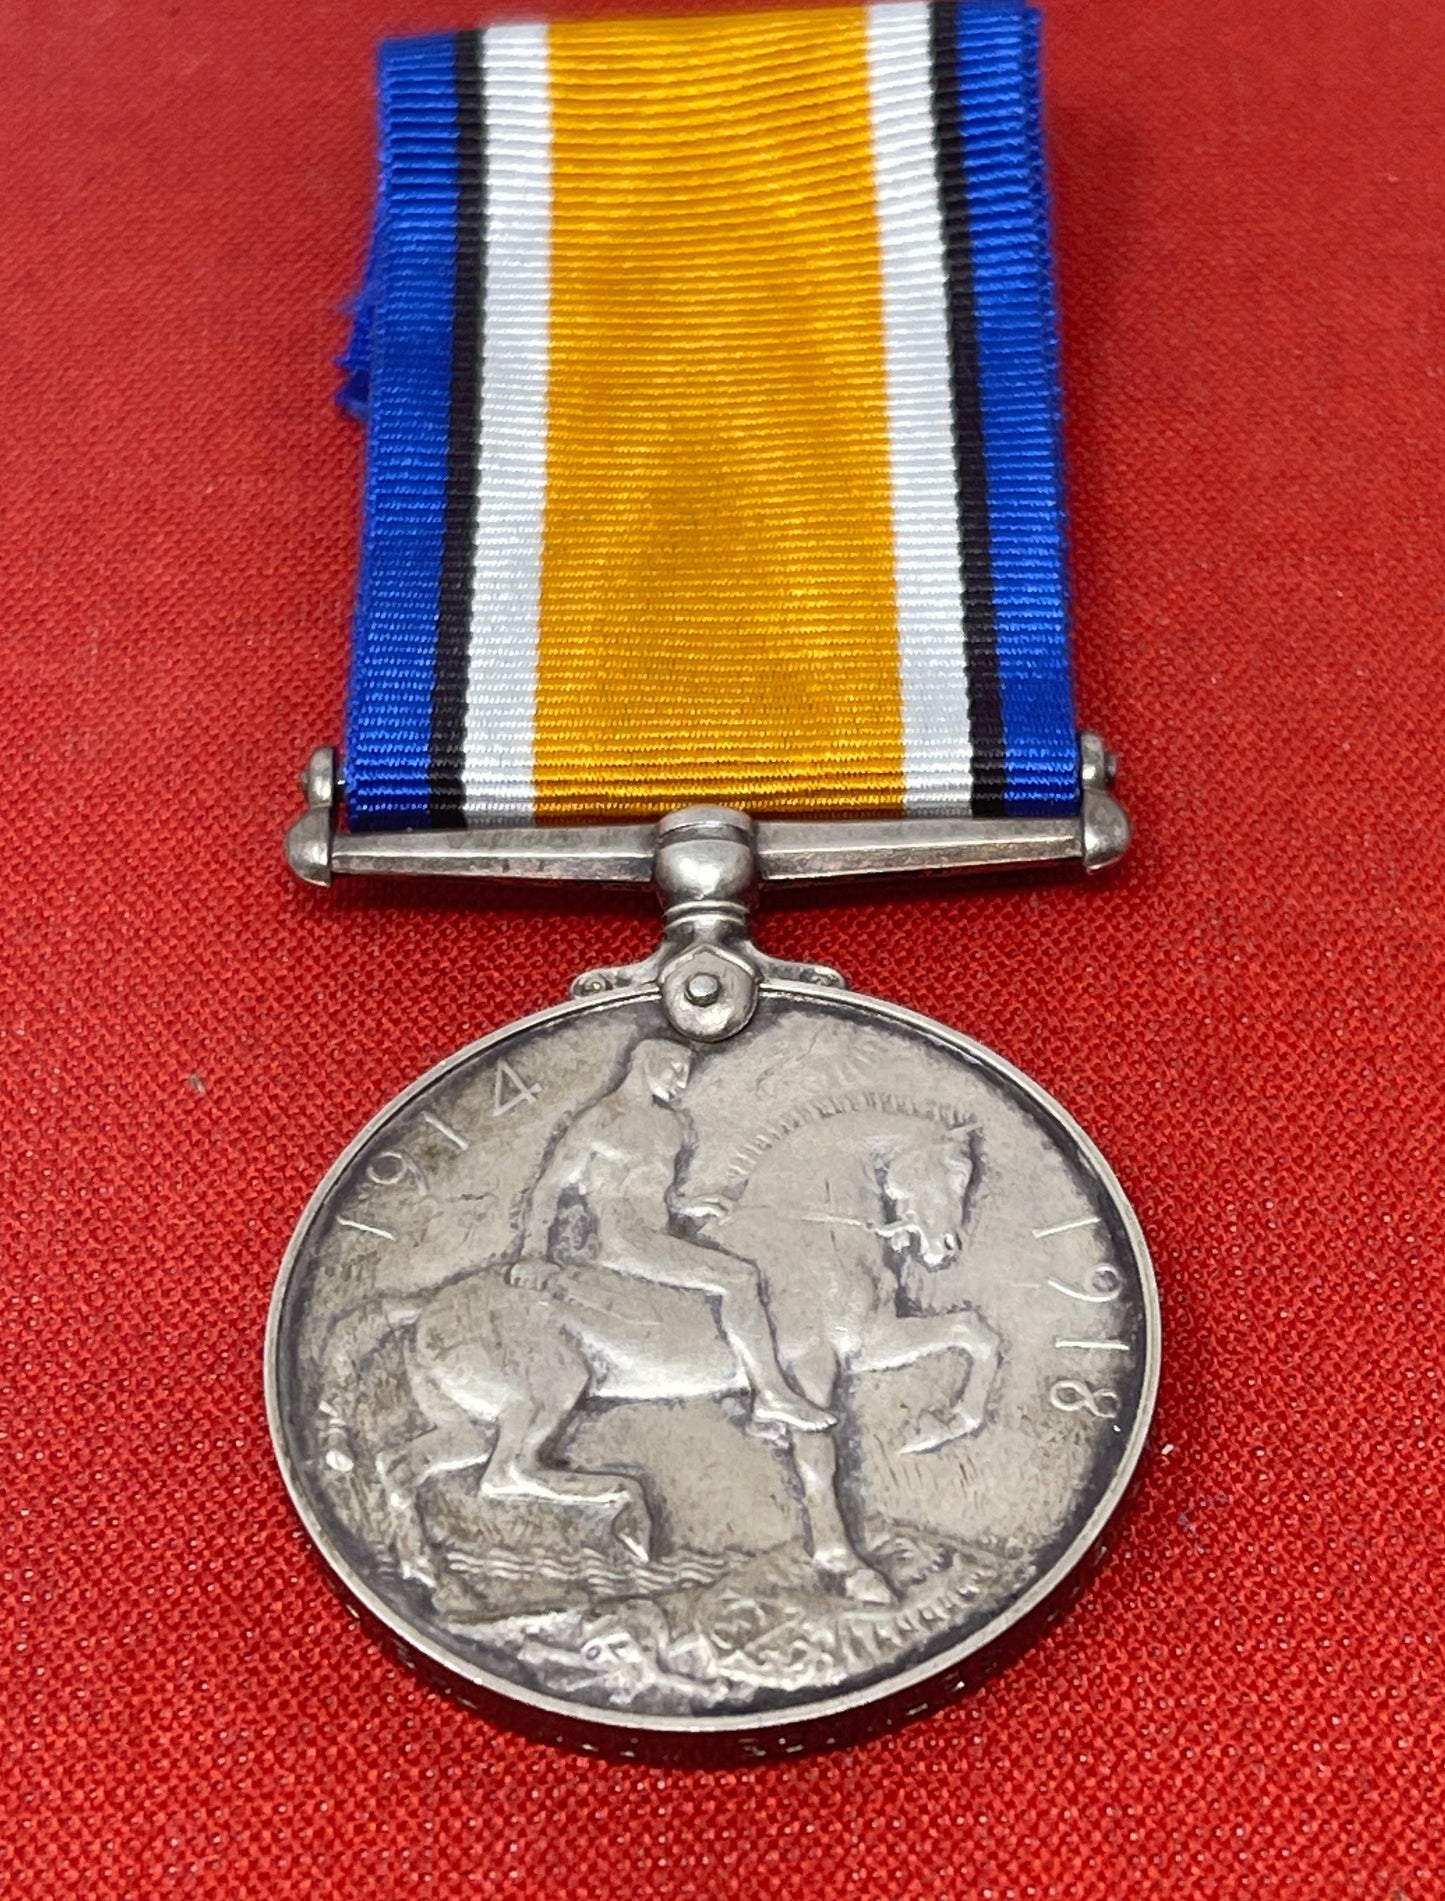  British War Medal  Service with the Royal Navy